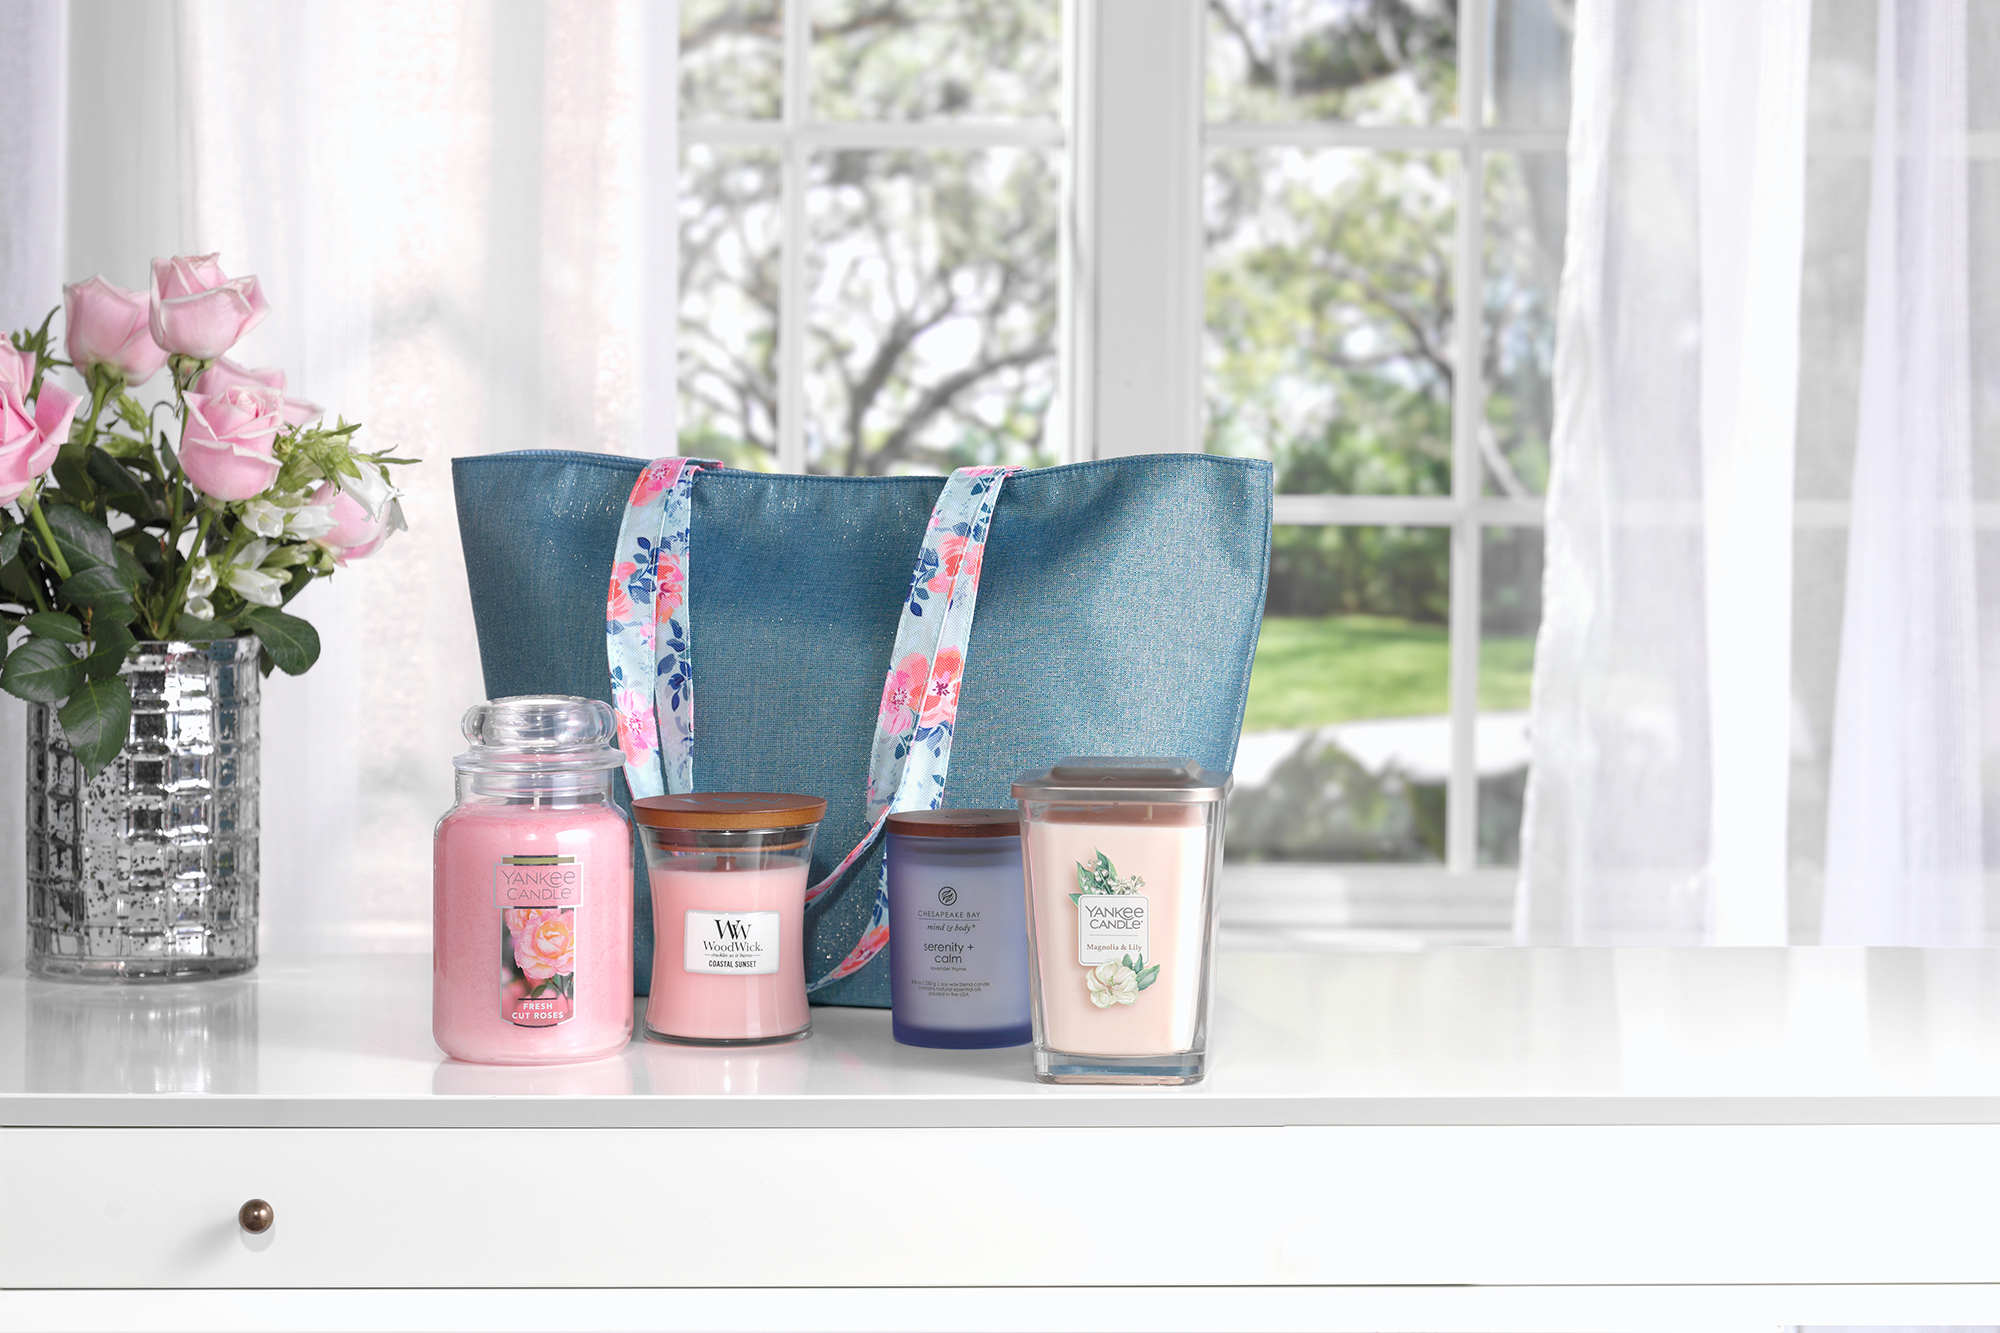 This Yankee Candle Mother's Day Gift Set Already Comes in a Bag!